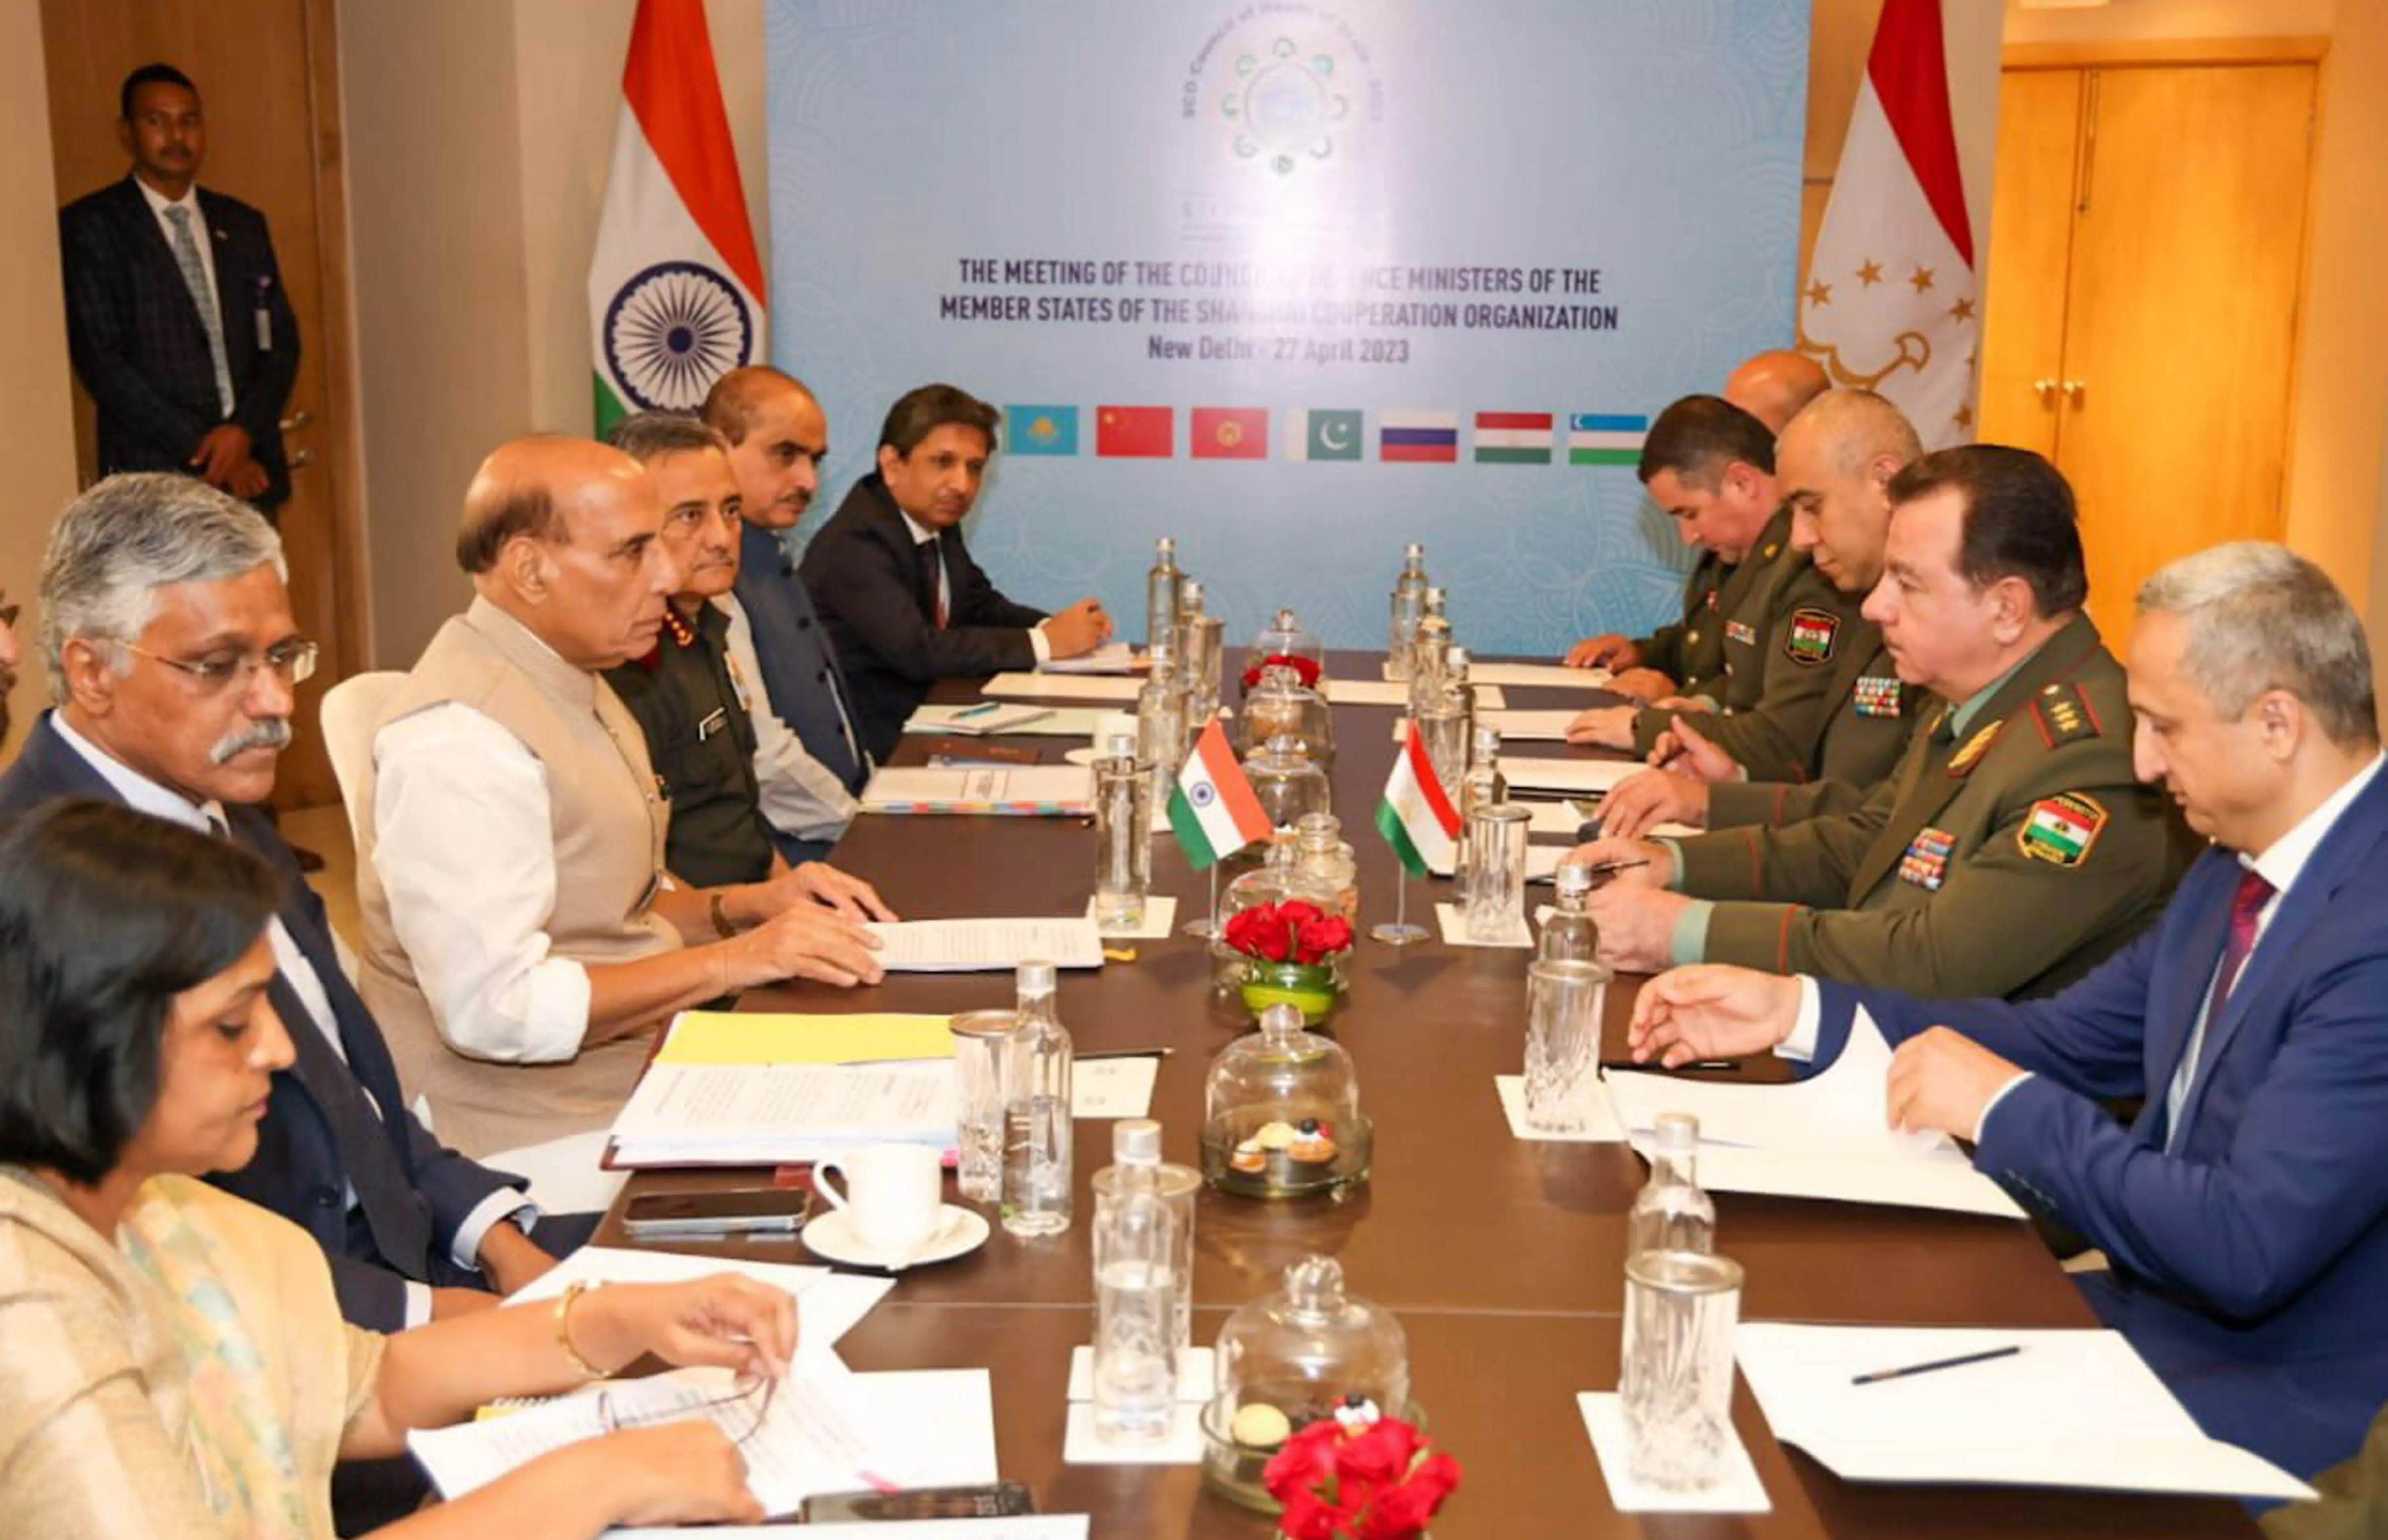 All issues at LAC need to be resolved as per existing bilateral pacts: Rajnath to Chinese defence minister Li